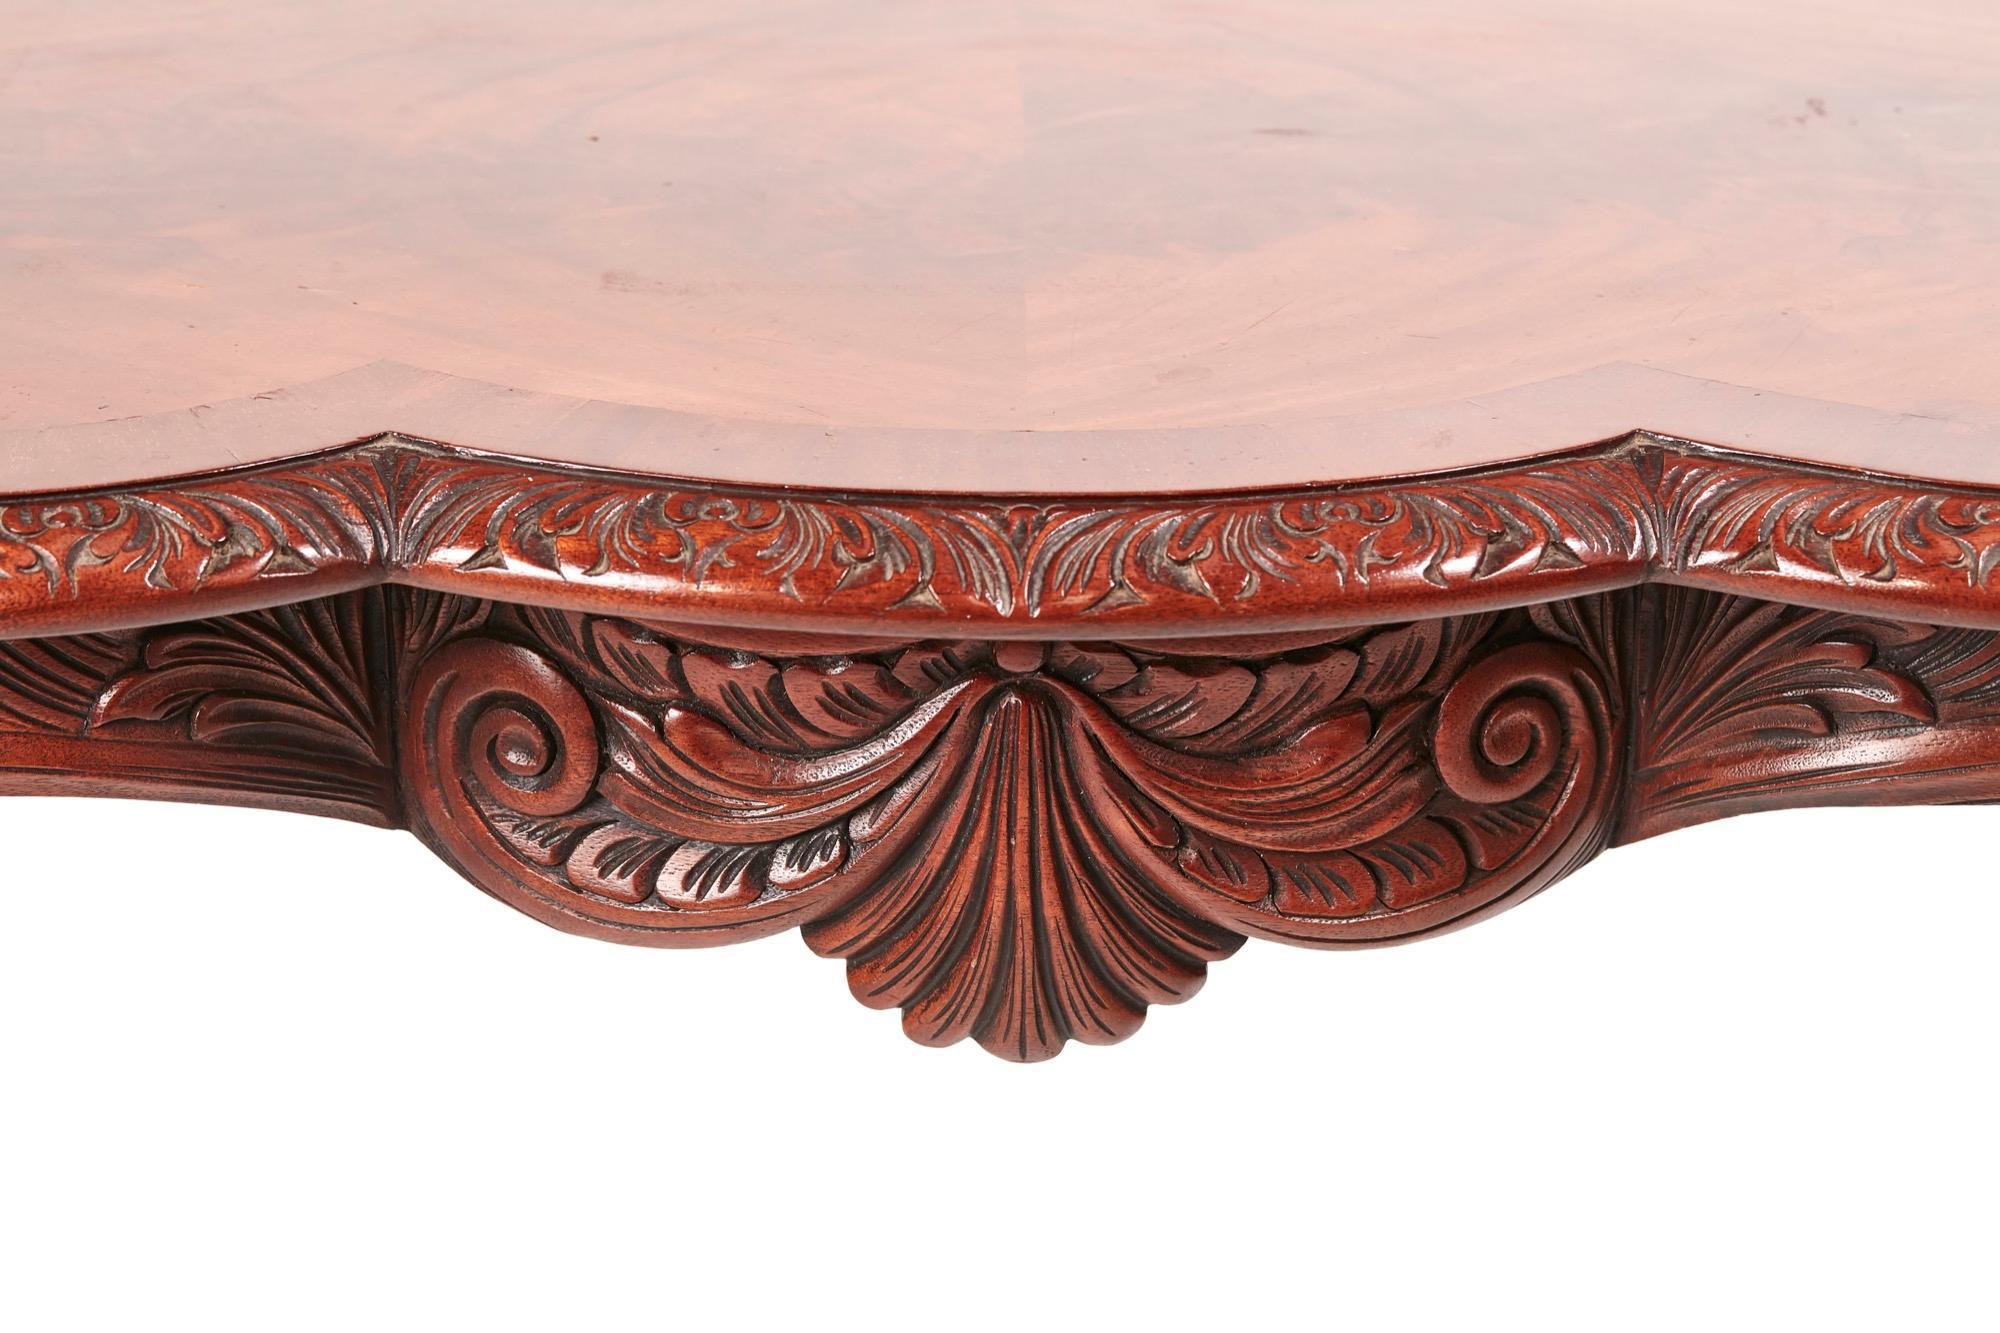 Quality freestanding carved mahogany centre table, having a lovely crossbanded mahogany top with a carved edge, carved frieze, standing on four carved shaped cabriole legs with pad feet.
Lovely color and condition.
Measures: 46